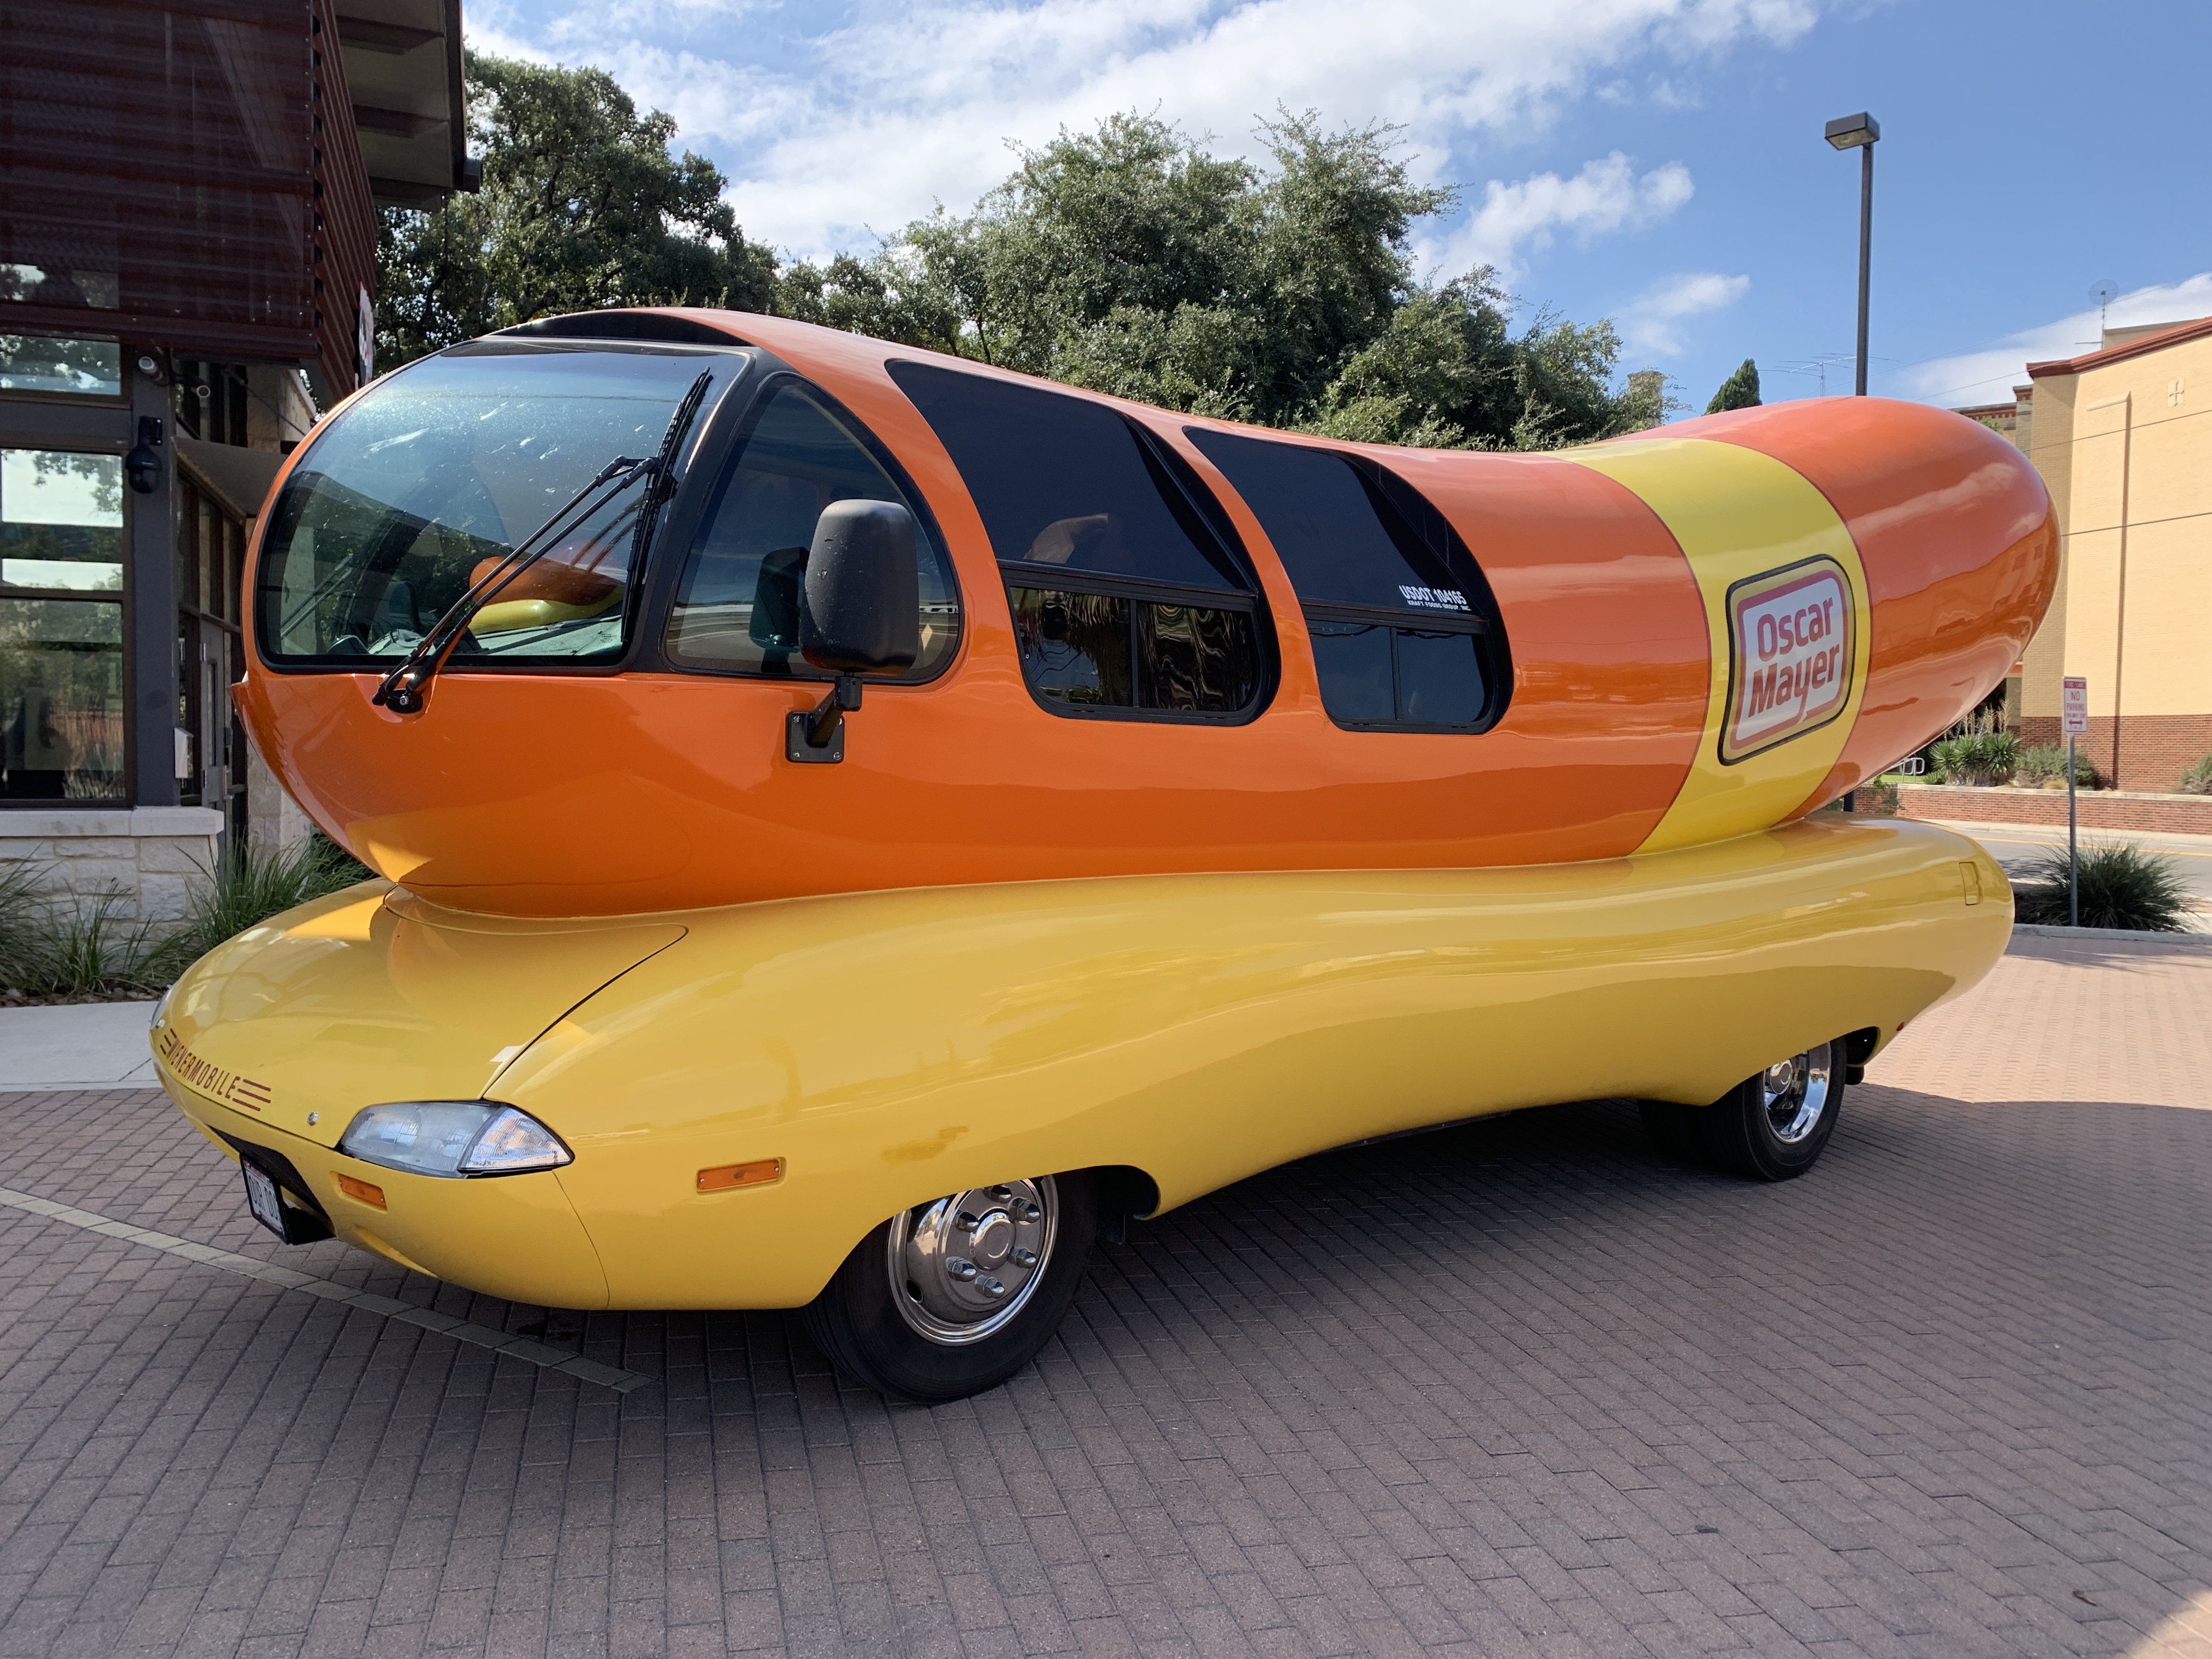 Ketchup With The Oscar Mayer Wienermobile As It Visits San Antonio